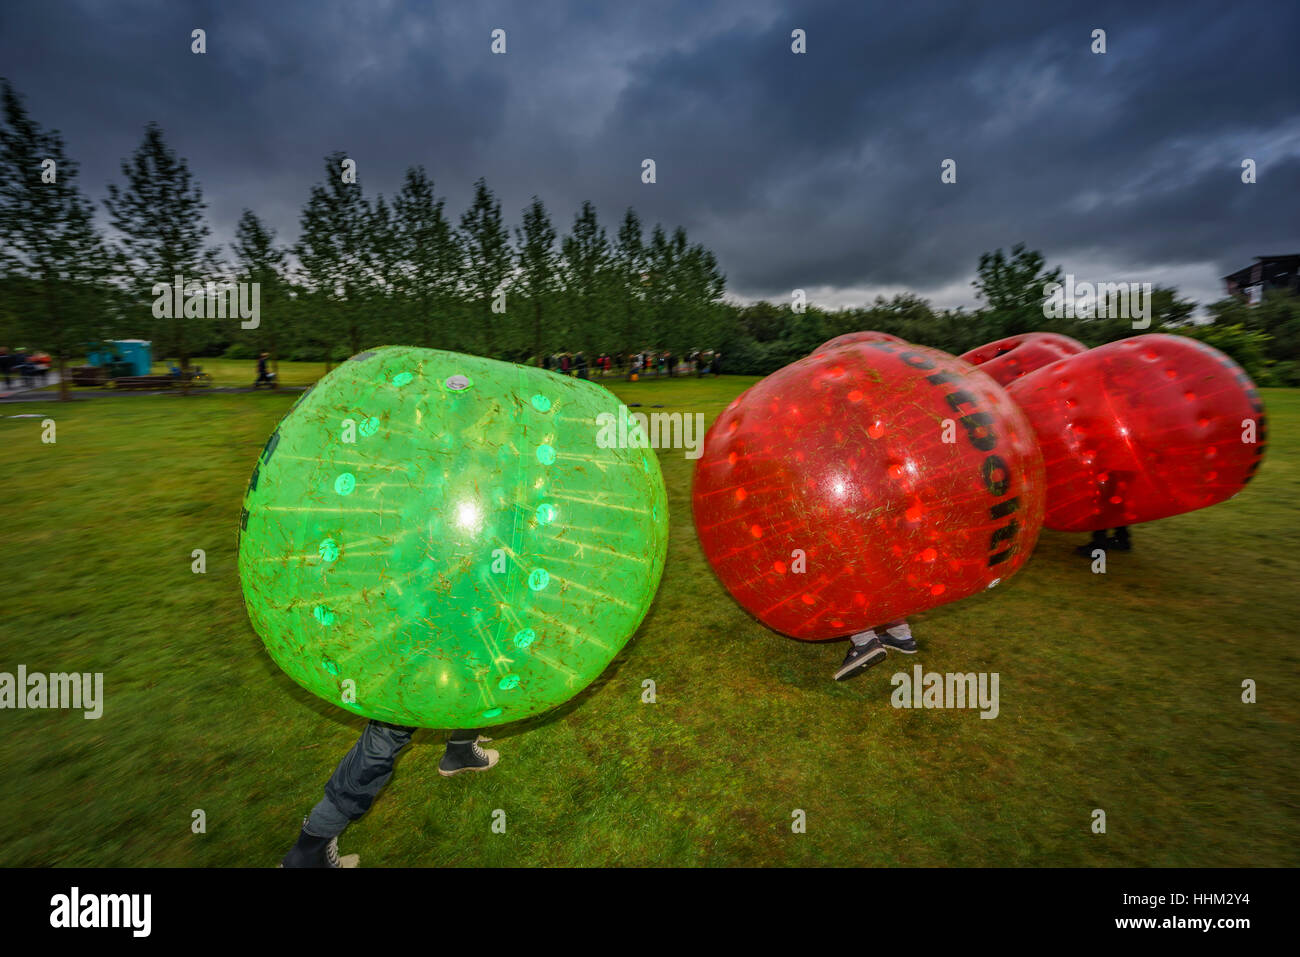 People having fun in inflatable bubble balls, Reykjavik, Iceland Stock Photo